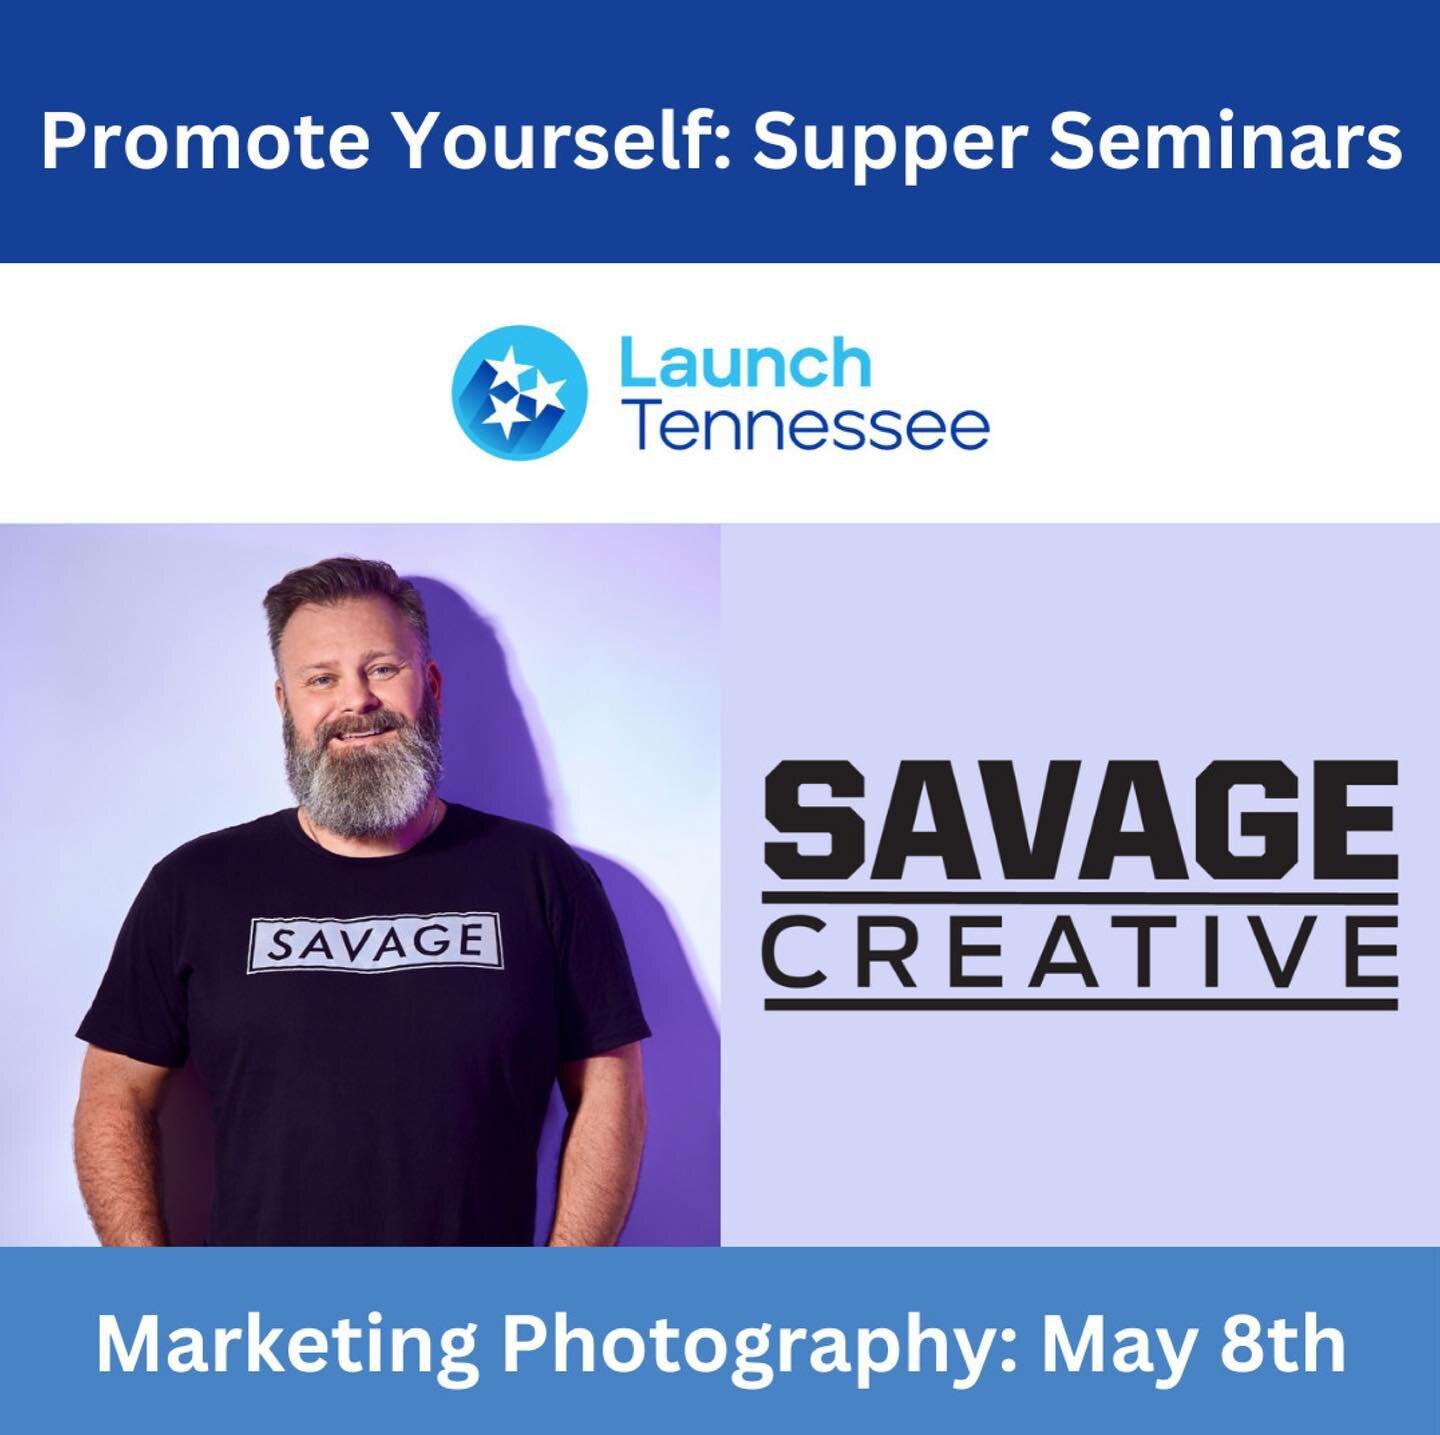 🚨📰&iexcl;SOLD OUT!📰🚨

I&rsquo;m so excited that tonight&rsquo;s Launch Tennessee Supper Seminar at @theinventorcenter is SOLD OUT! I can&rsquo;t wait to teach local makers how to market themselves and their products with better photos! I love tea